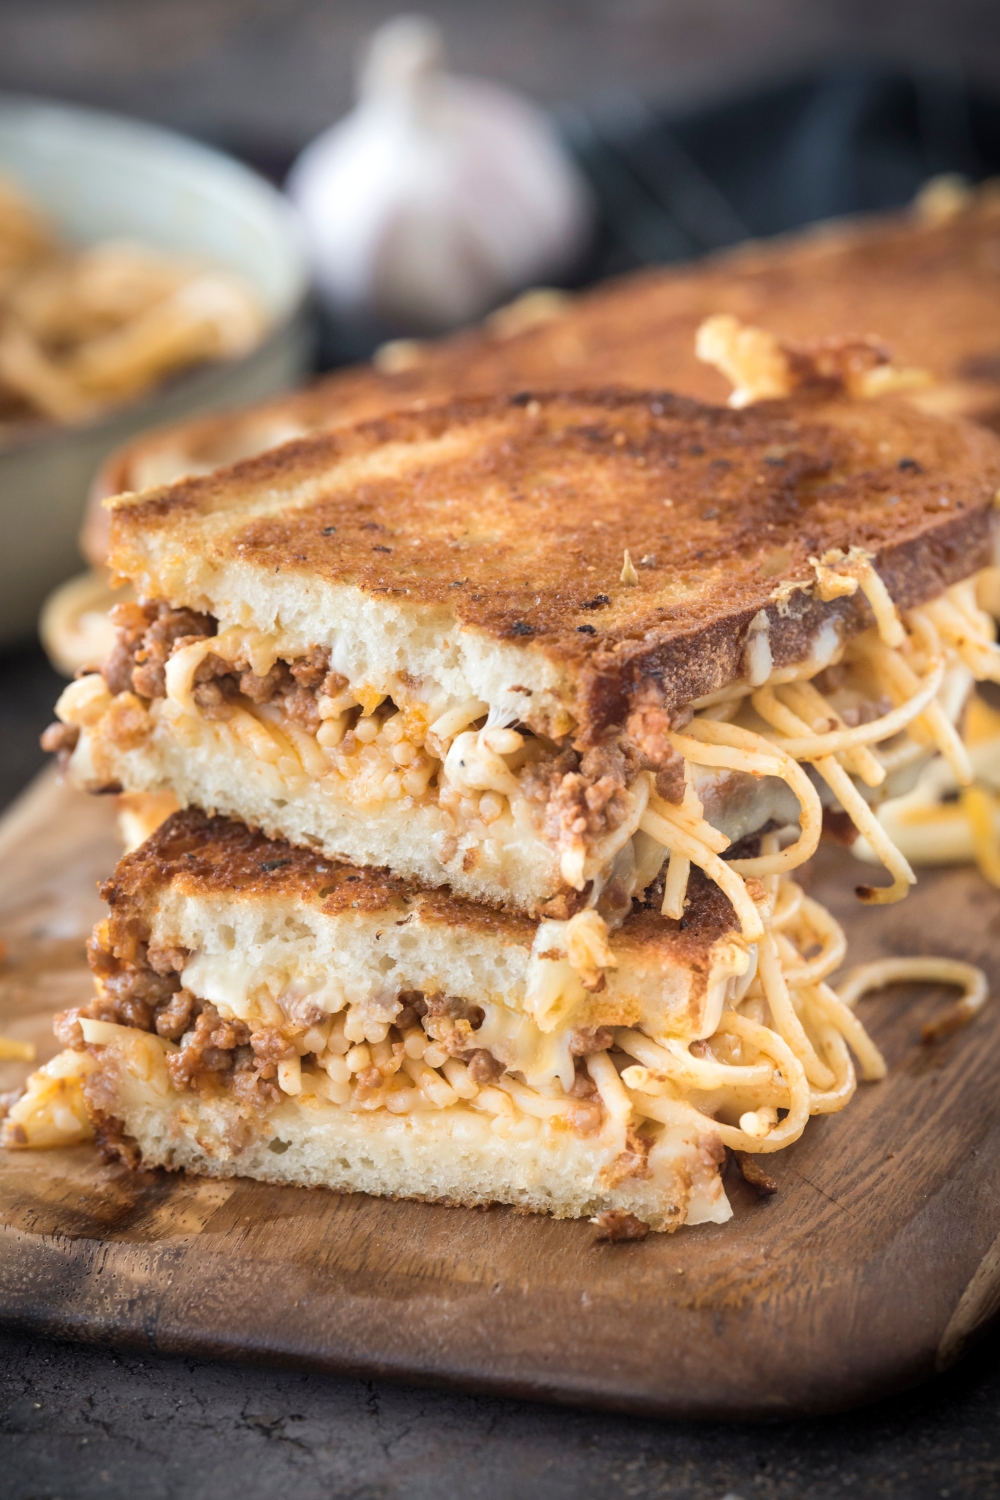 A spaghetti sandwich cut in half and each half is stacked on top of each other. Spaghetti noodles are spilling out of the sides of the bread.